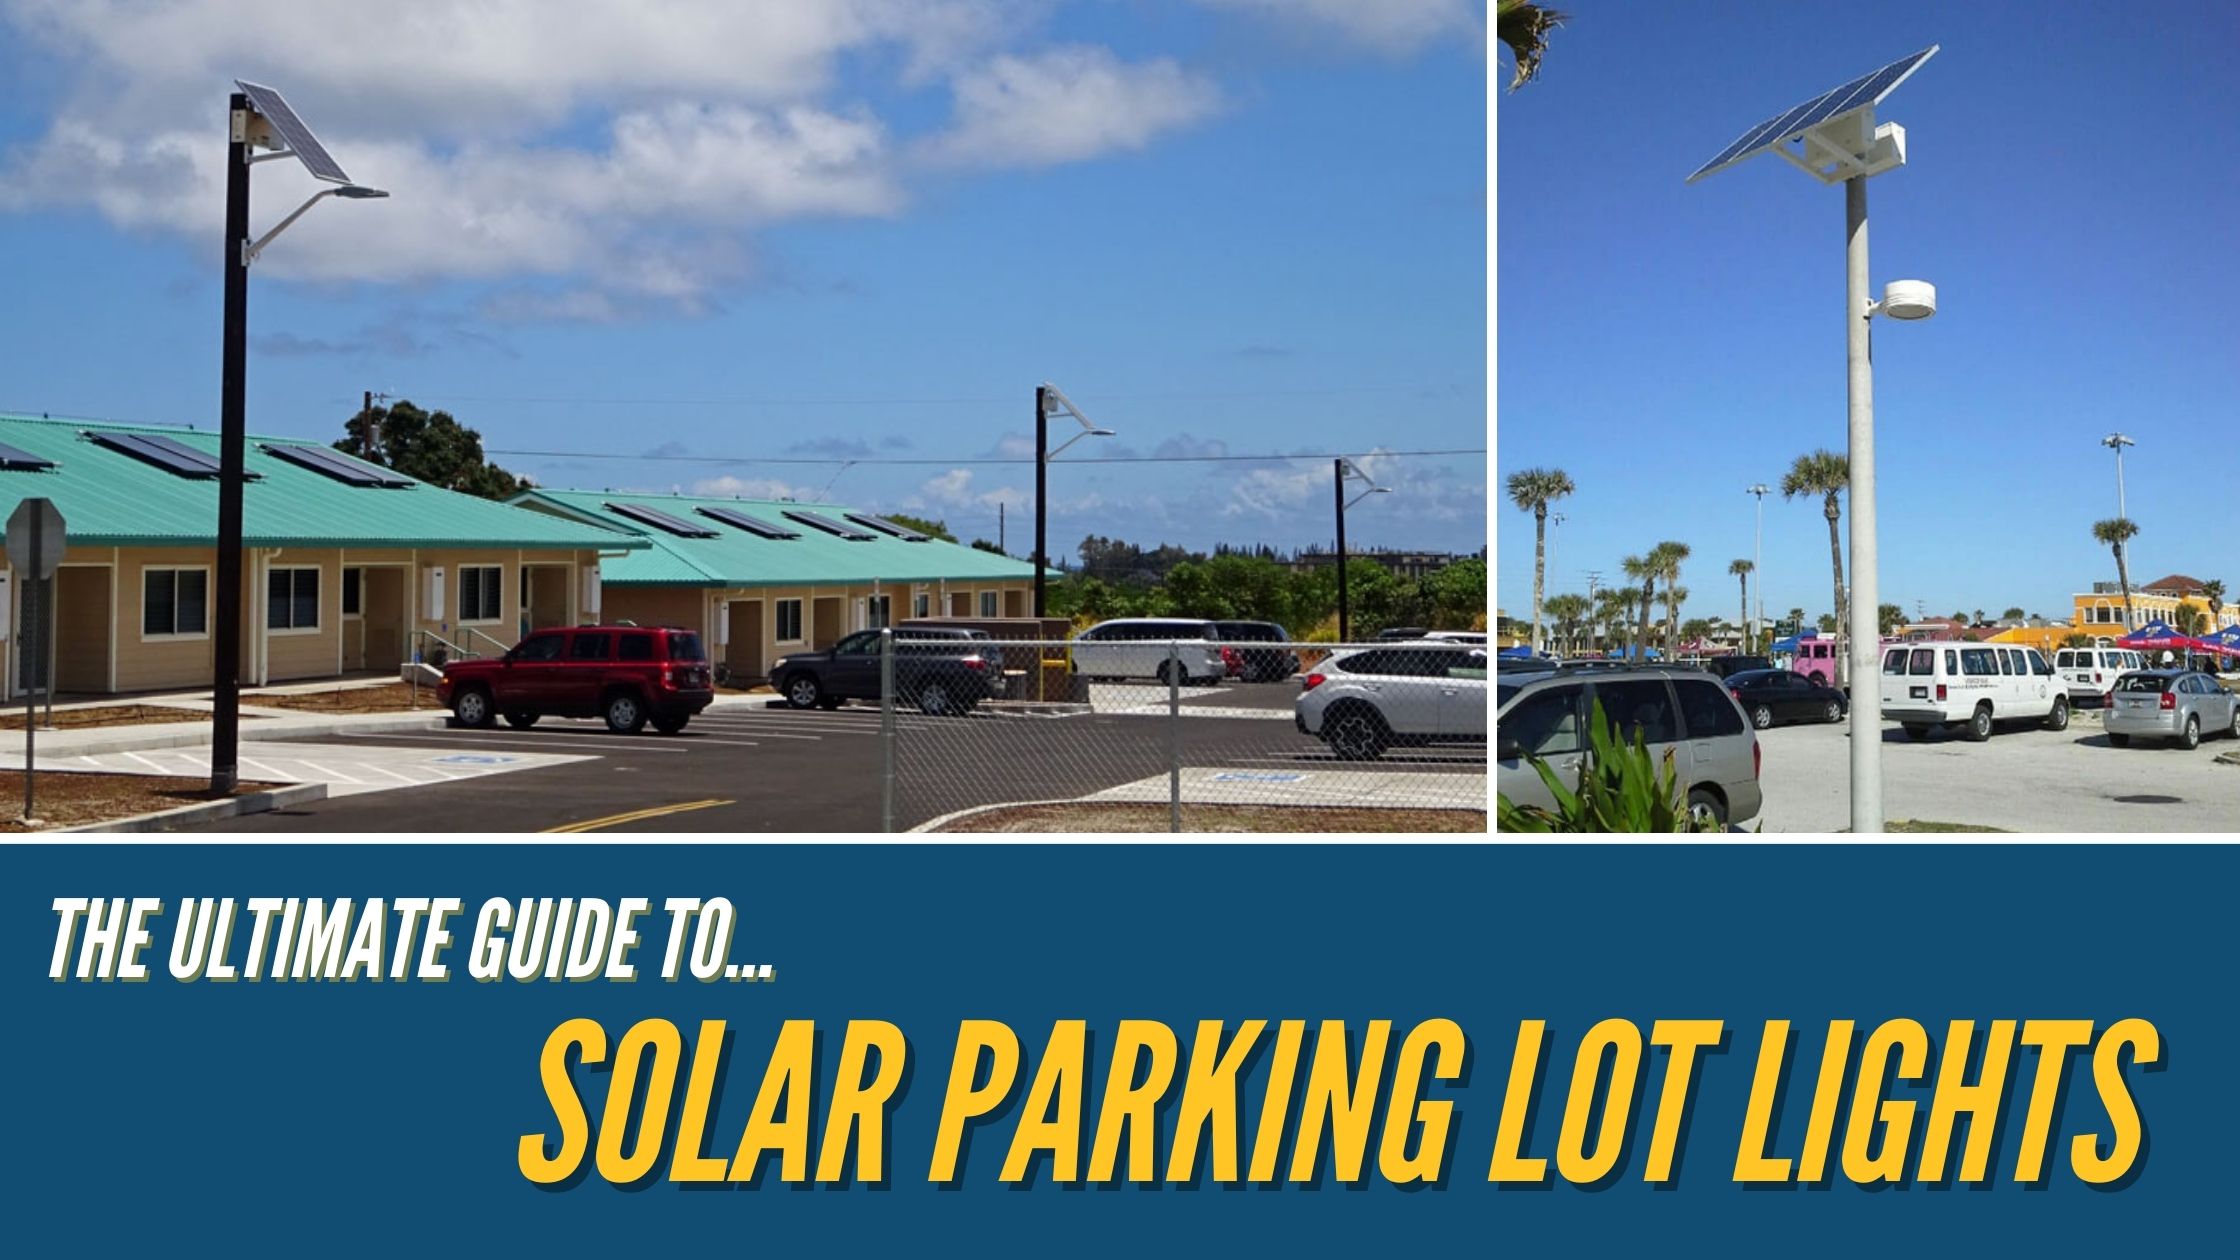 The Ultimate Guide to Solar Parking Lot Lights